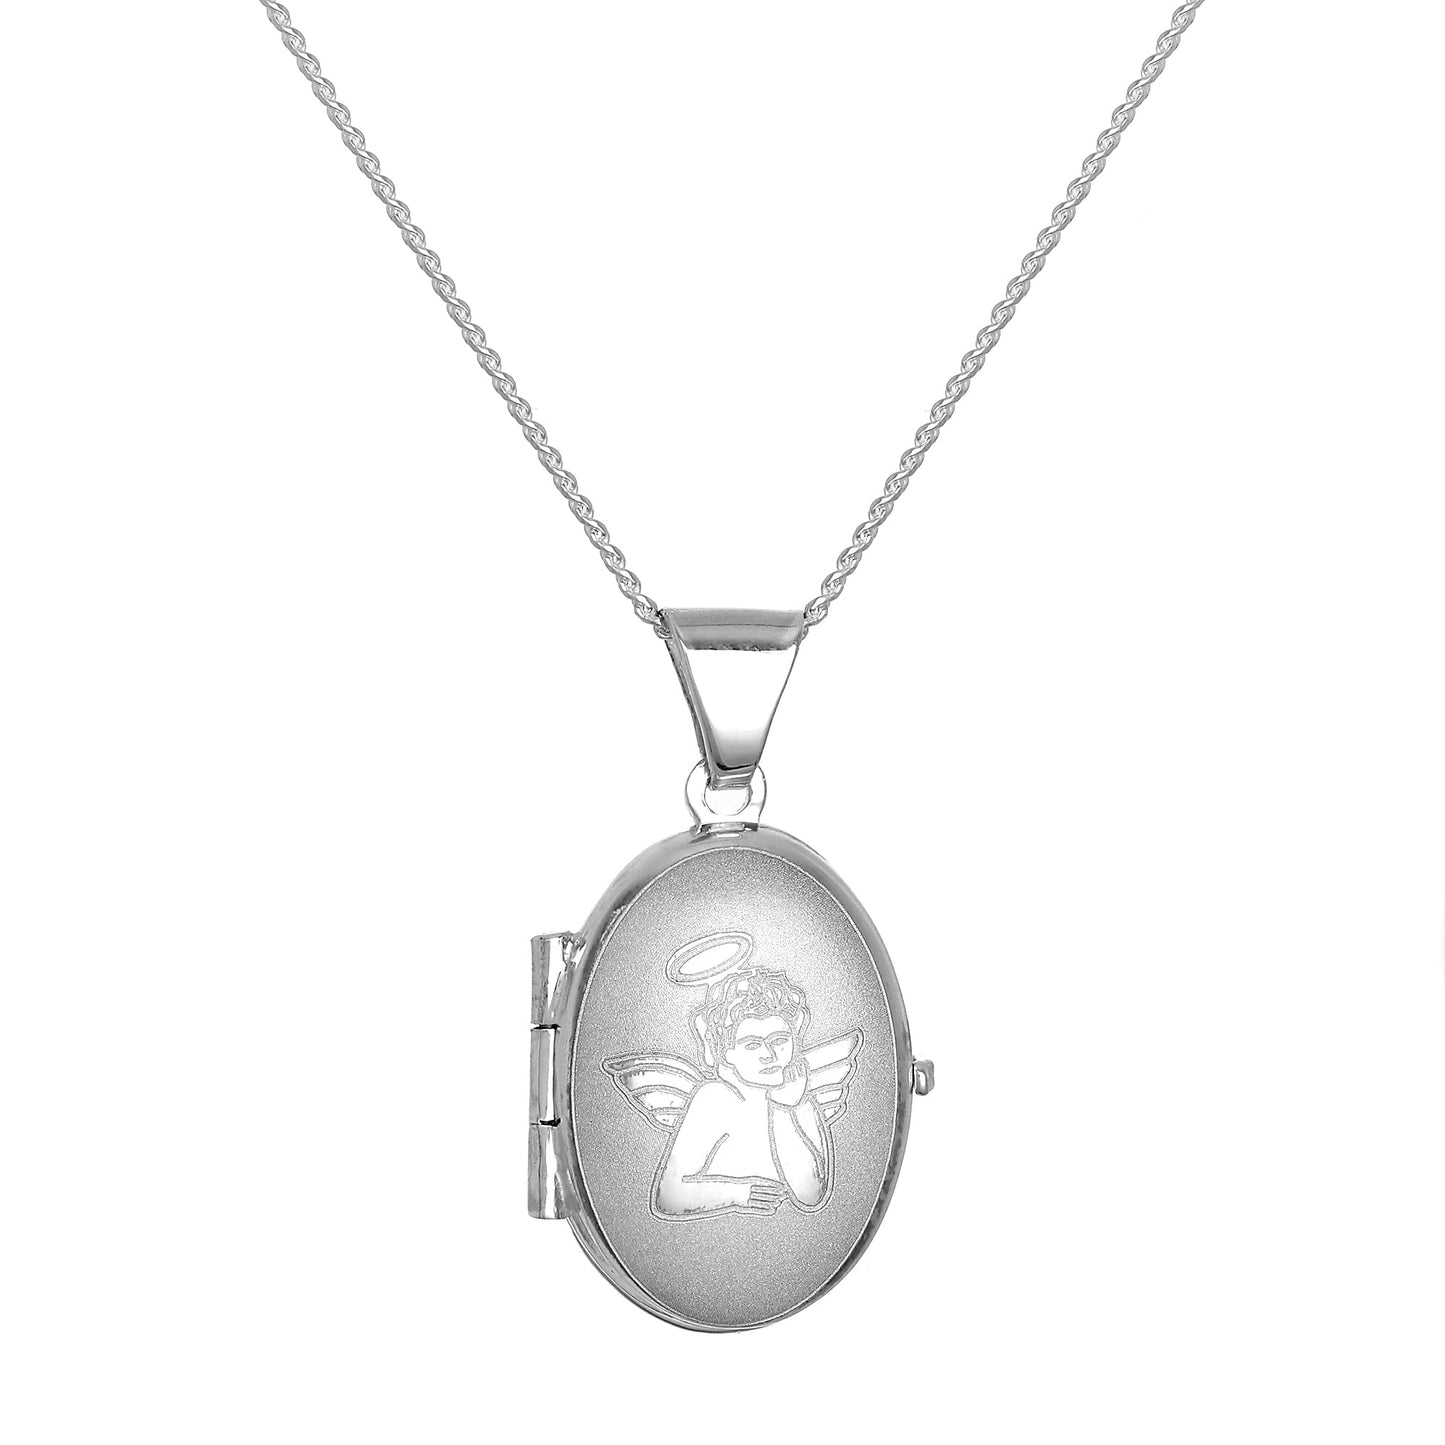 Small Matt Sterling Silver Oval Locket with Angel on Chain